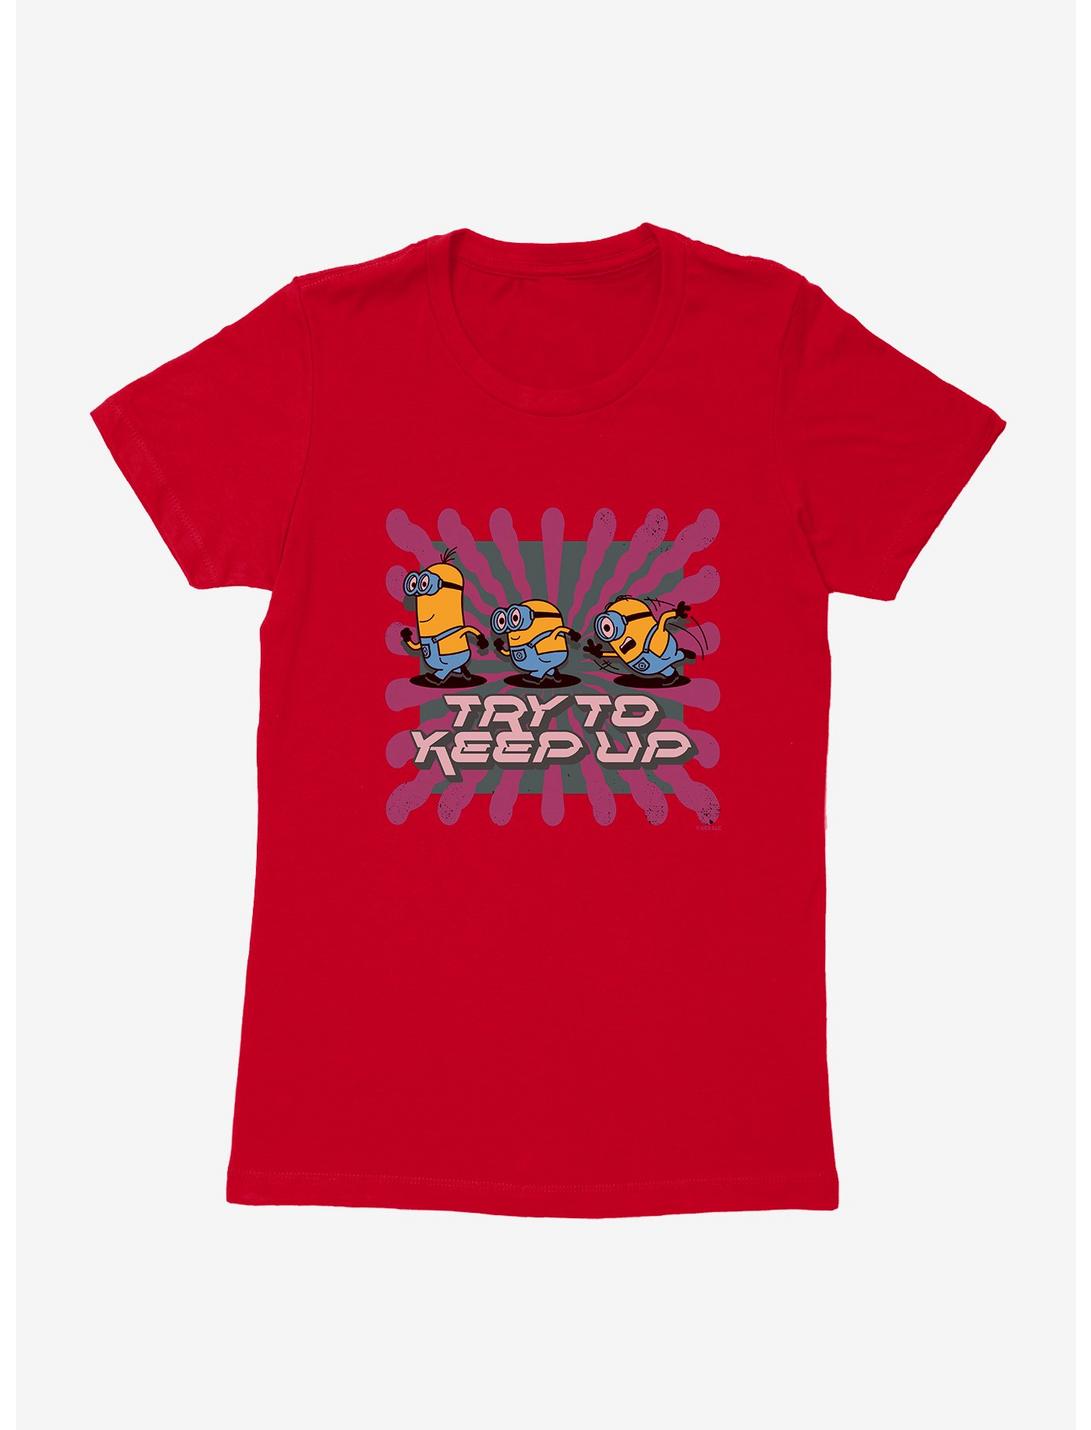 Minions Keep Up Womens T-Shirt, RED, hi-res